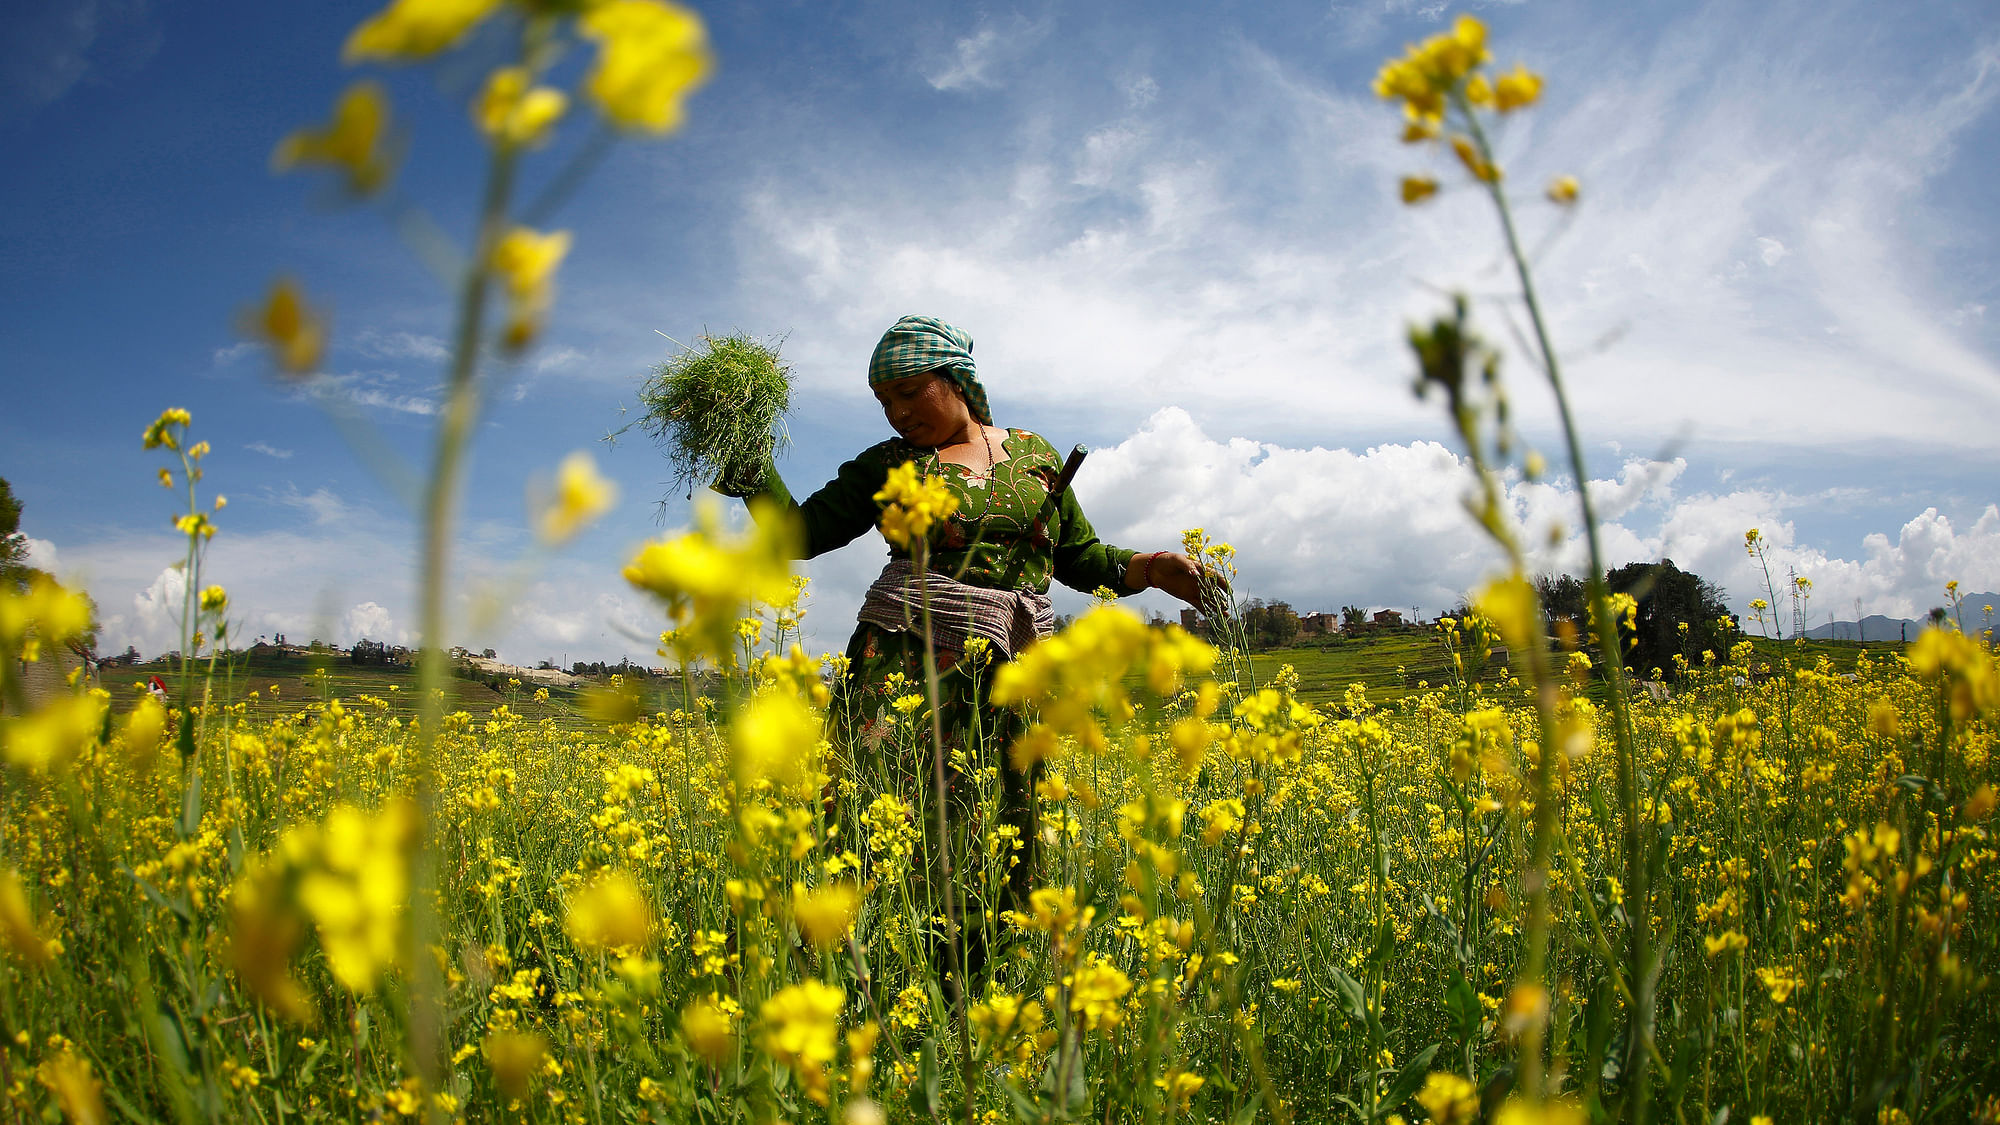 A woman works in the mustard fields of Khokana in Lalitpur, March 18, 2015. (Photo Courtesy: Reuters)